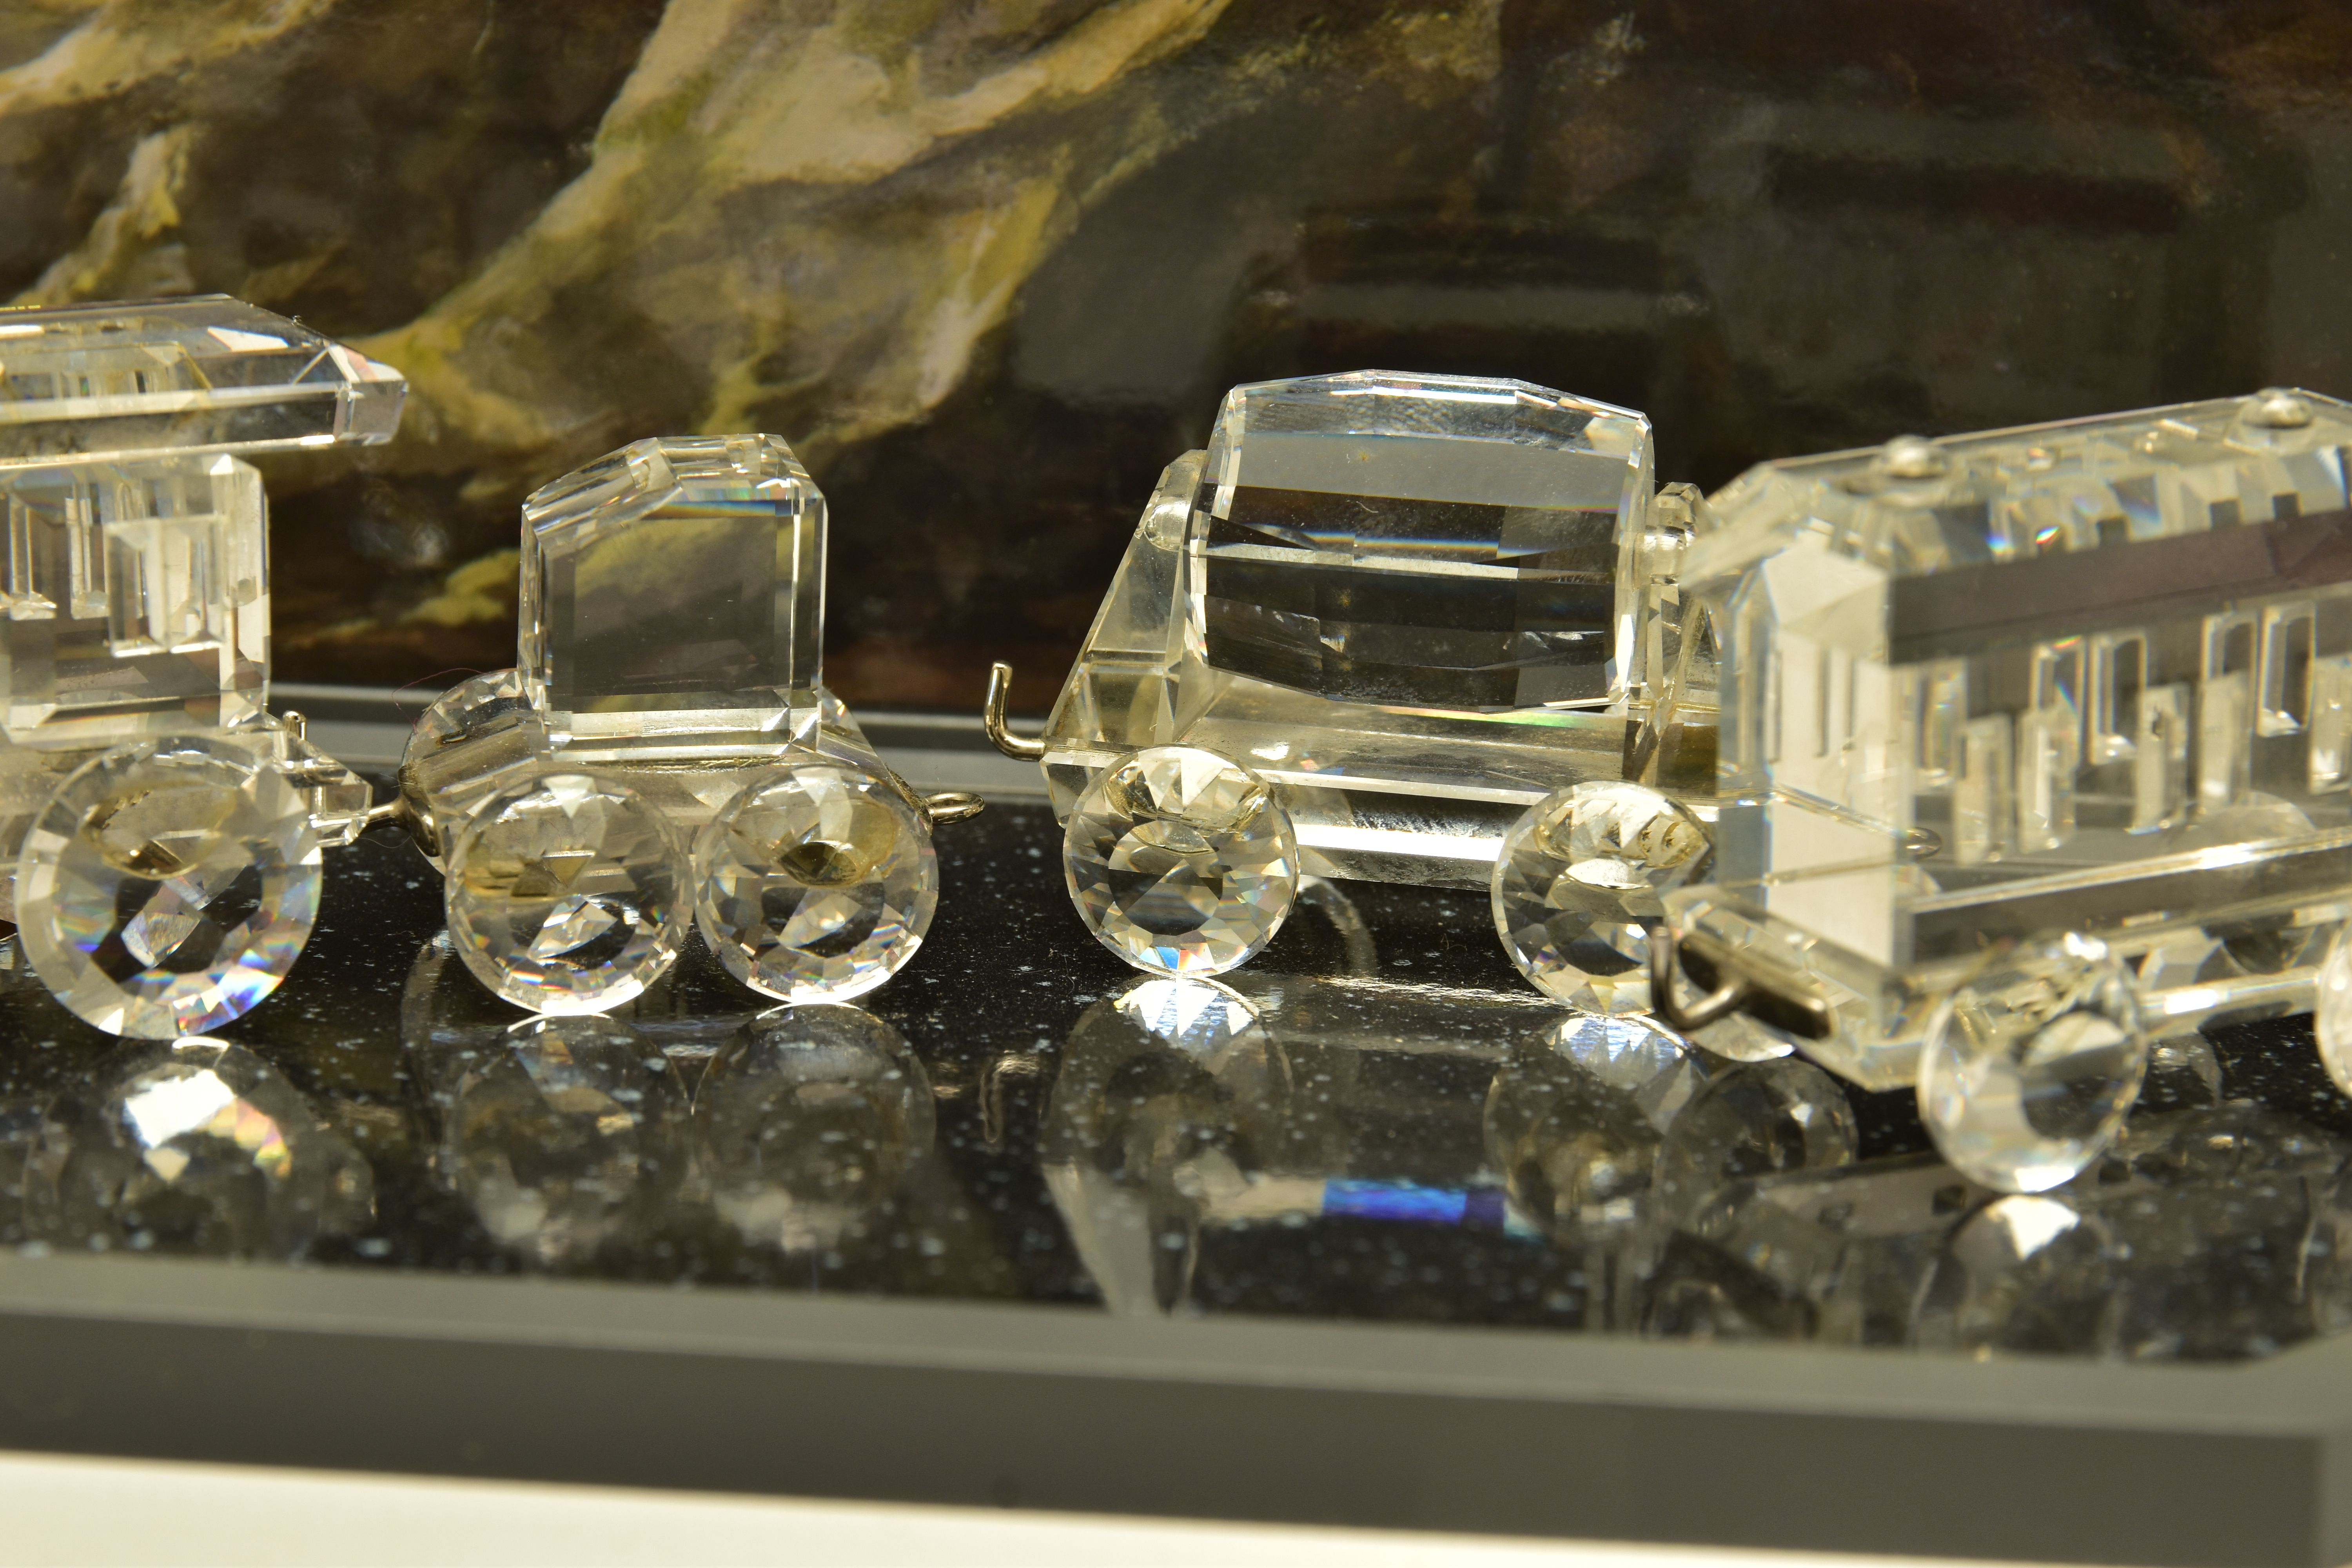 SWAROVSKI CRYSTAL EXPRESS TRAIN FROM WHEN WE WERE YOUNG SERIES, comprising boxed Locomotive (015145) - Image 3 of 5